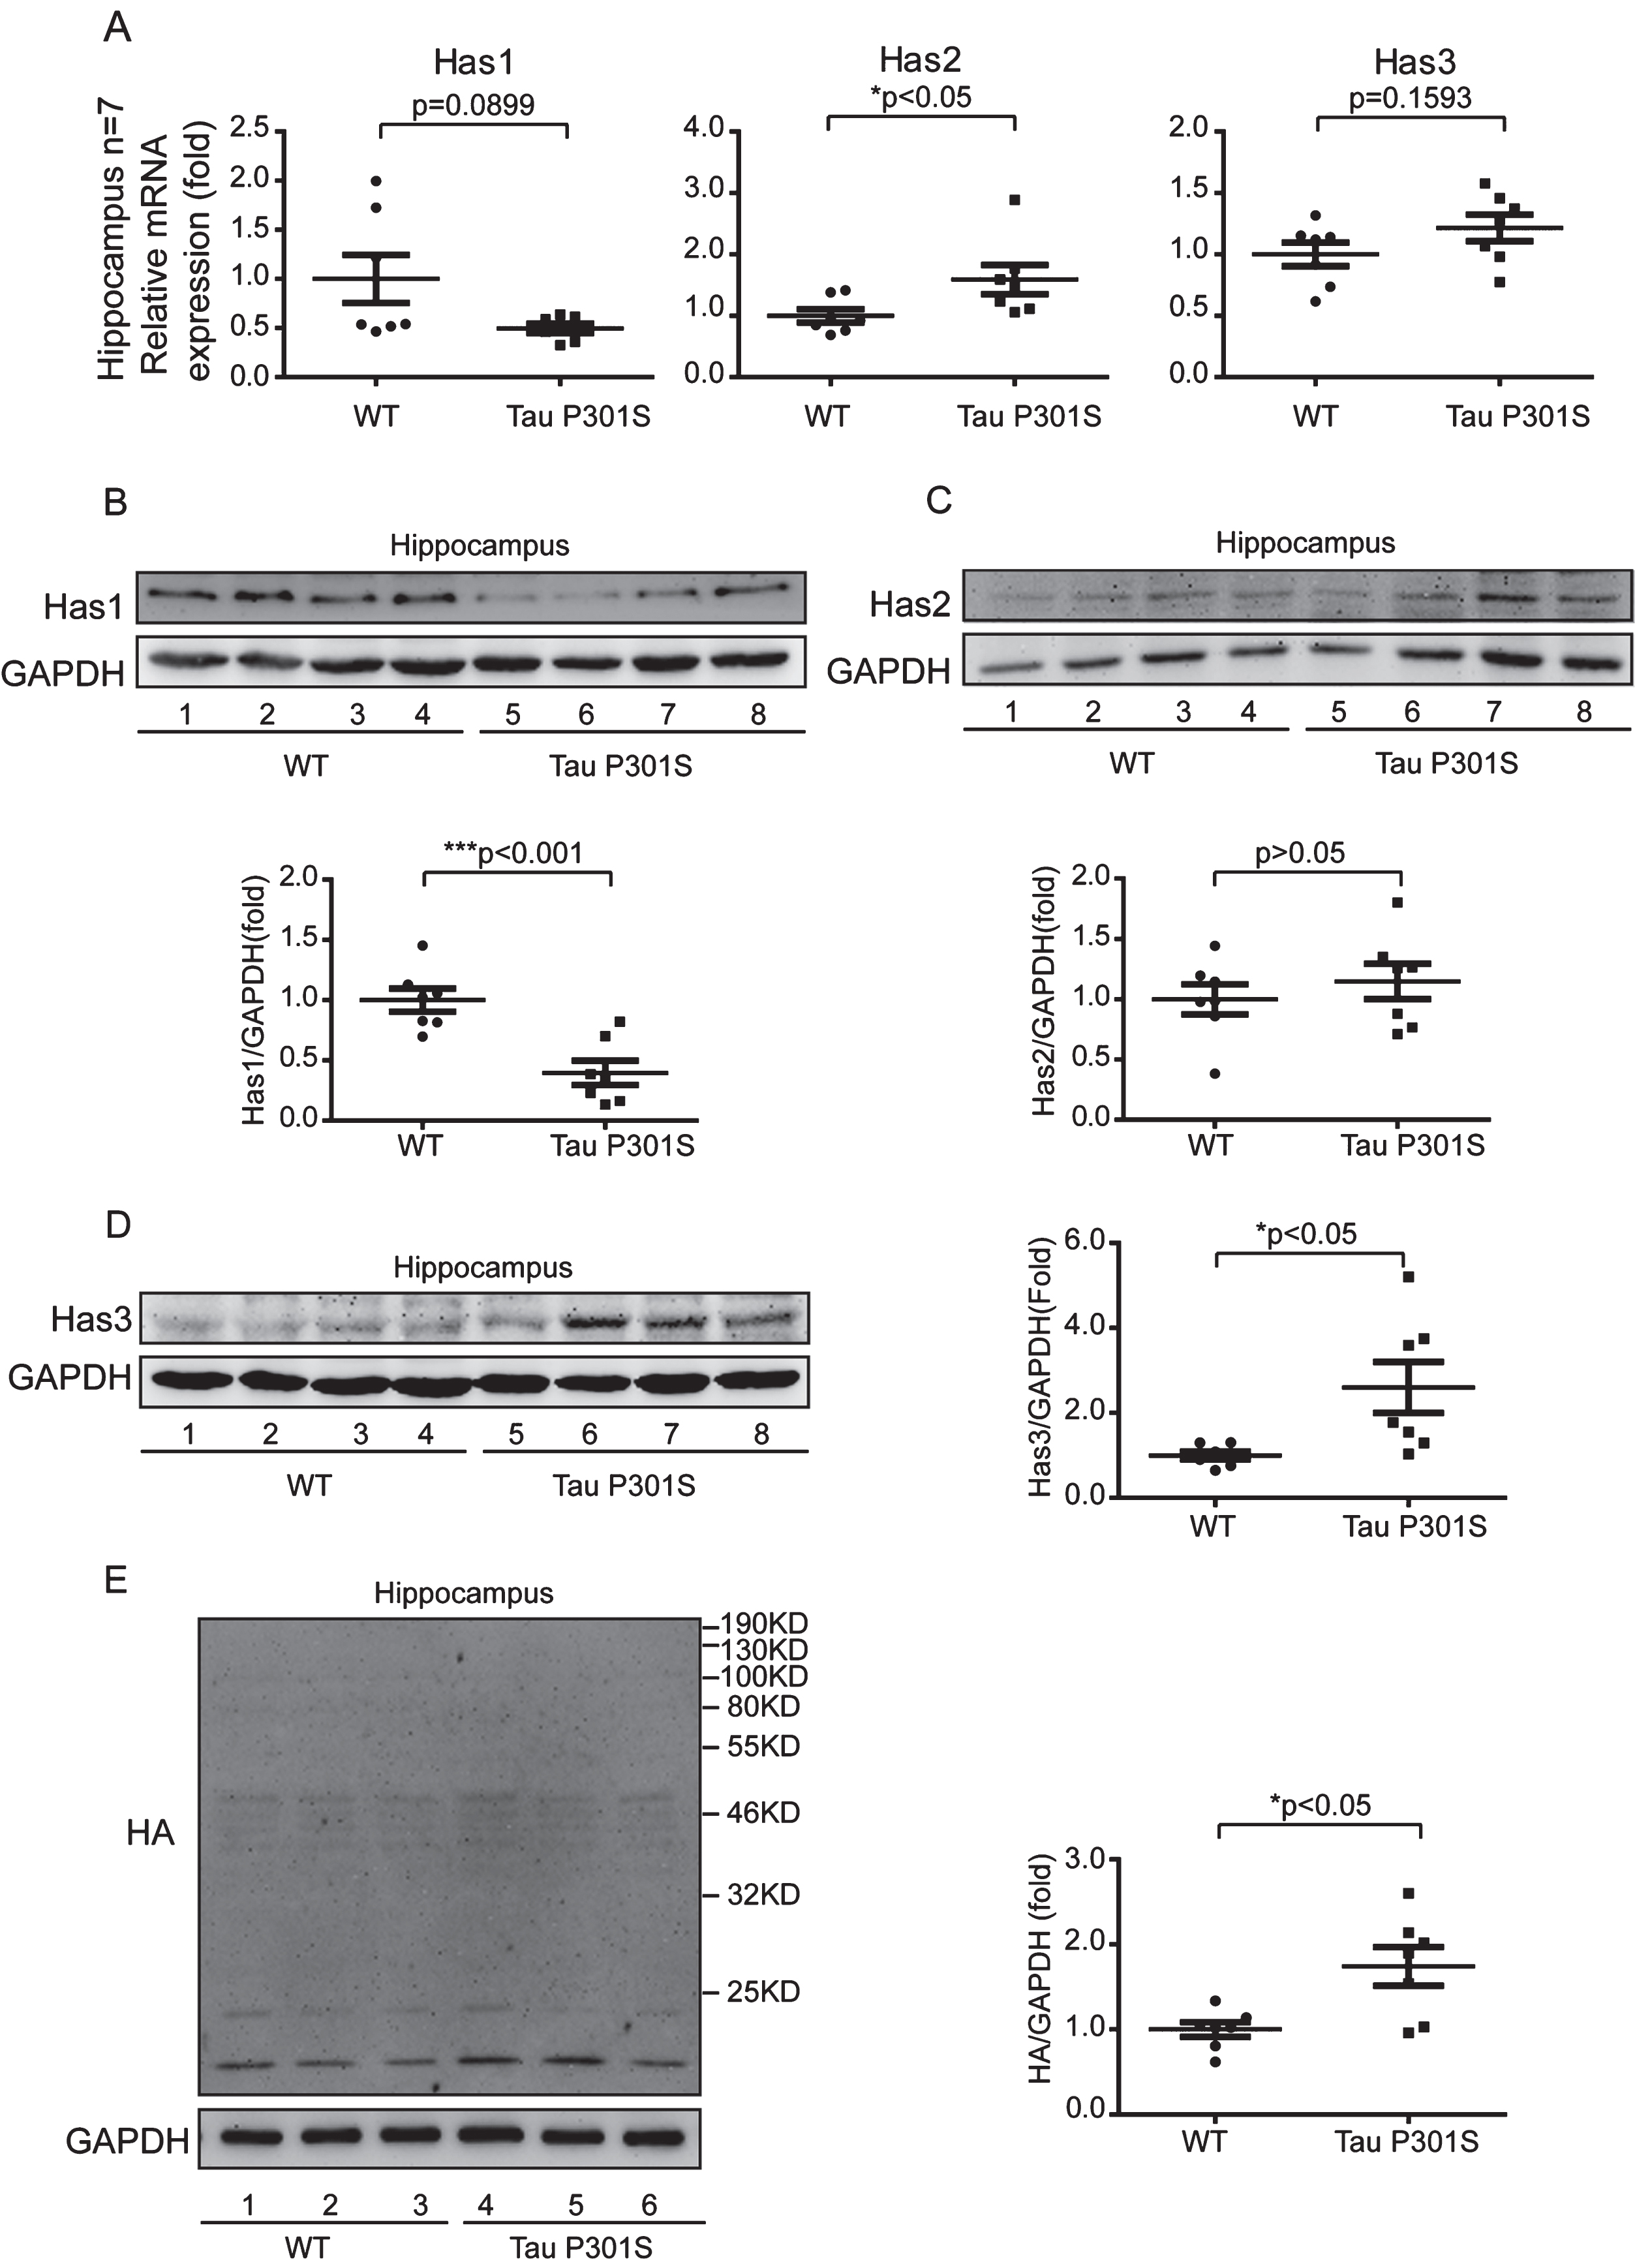 Tau pathology promotes the production of short chain HA (<200 kDa) through regulating of HASs expression in hippocampus. A) Quantitative real-time PCR data showing the mRNA expression levels of Has1, Has2, and Has3 in the hippocampus of the TauP301S Tg mice and control mice (10-month-old). B-D) TauP301S inhibits the expression of Has1 and promotes Has3 expression in the hippocampus of TauP301S Tg mice. B) Immunoblot images (upper panel) and quantifications (lower panel) demonstrating that Has1 is decreased in hippocampus of the TauP301S Tg mice. C) Immunoblot images (upper panel) and quantifications (lower panel) illustrating that Has2 is not altered in the hippocampus of the TauP301S Tg mice. In contrast, the protein level of Has3 (D, left and right panels) is increased in the hippocampus of the TauP301S Tg mice. E) Immunoblot images (left panel) and quantifications (right panel) demonstrating that short chain HA (< 200 kDa) is increased in the hippocampus of TauP301S Tg mice (Tau P301S). The data are presented as relative fold changes from the normal controls (WT). Data are represented as means±se.; n = 7 mice per group. *p < 0.05; ***p < 0.001. The p values were calculated using unpaired t-tests (A, middle and left panel; B, lower panel; C, lower panel; E, right panel) or unpaired t-tests with Welch’s corrections (A, left panel; D, right panel).